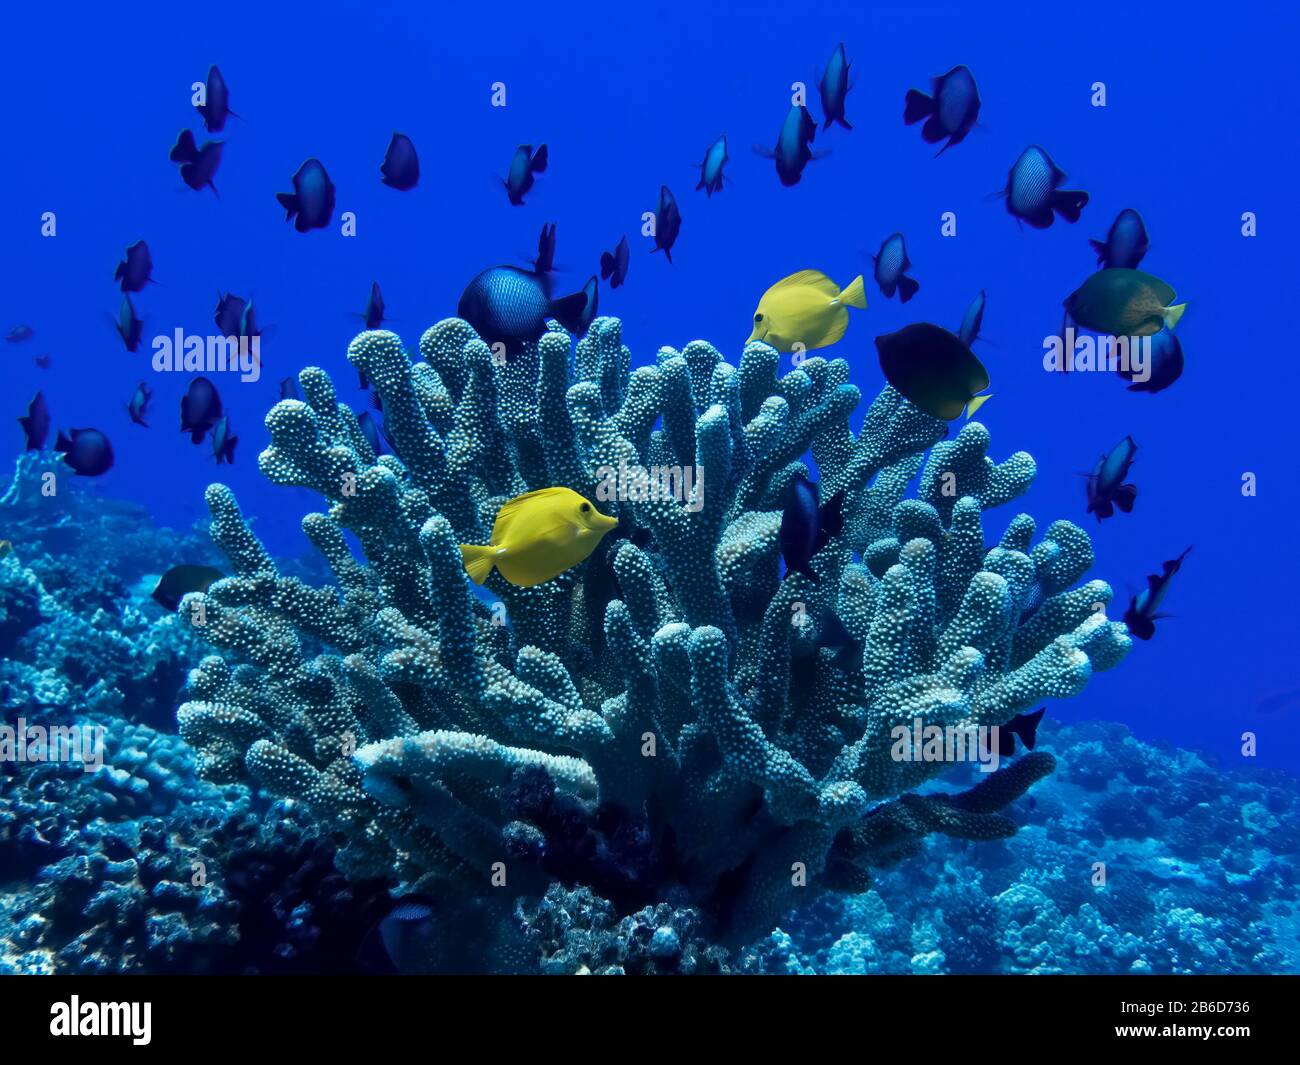 Yellow tang tropical fish with large school of damselfish surround antler coral in underwater image. Stock Photo